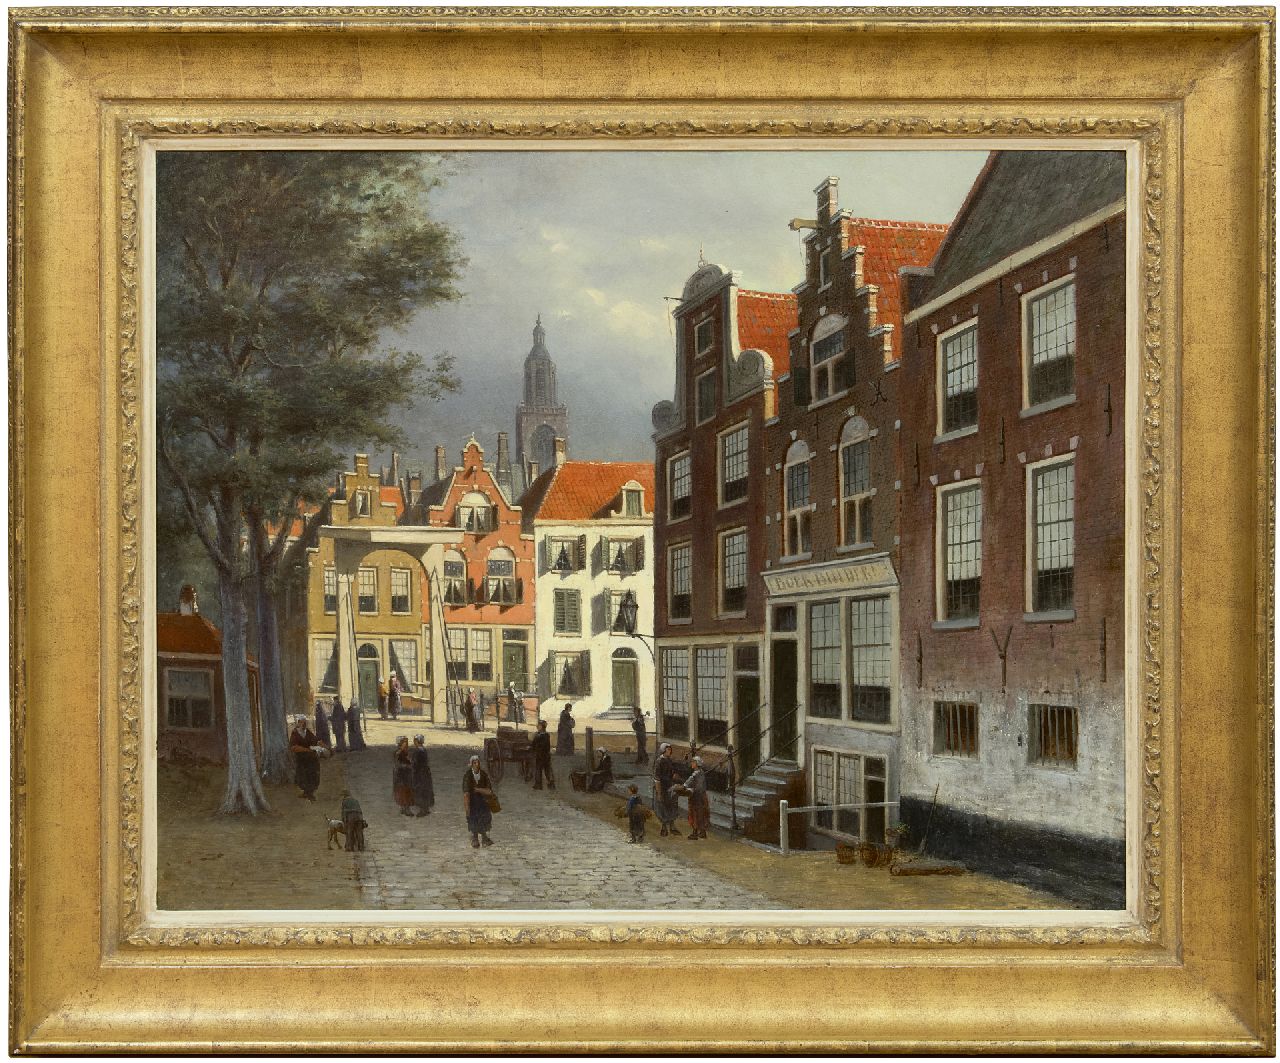 Hulk sr. J.F.  | Johannes Frederik Hulk sr. | Paintings offered for sale | Town view with figures, oil on canvas 66.7 x 82.5 cm